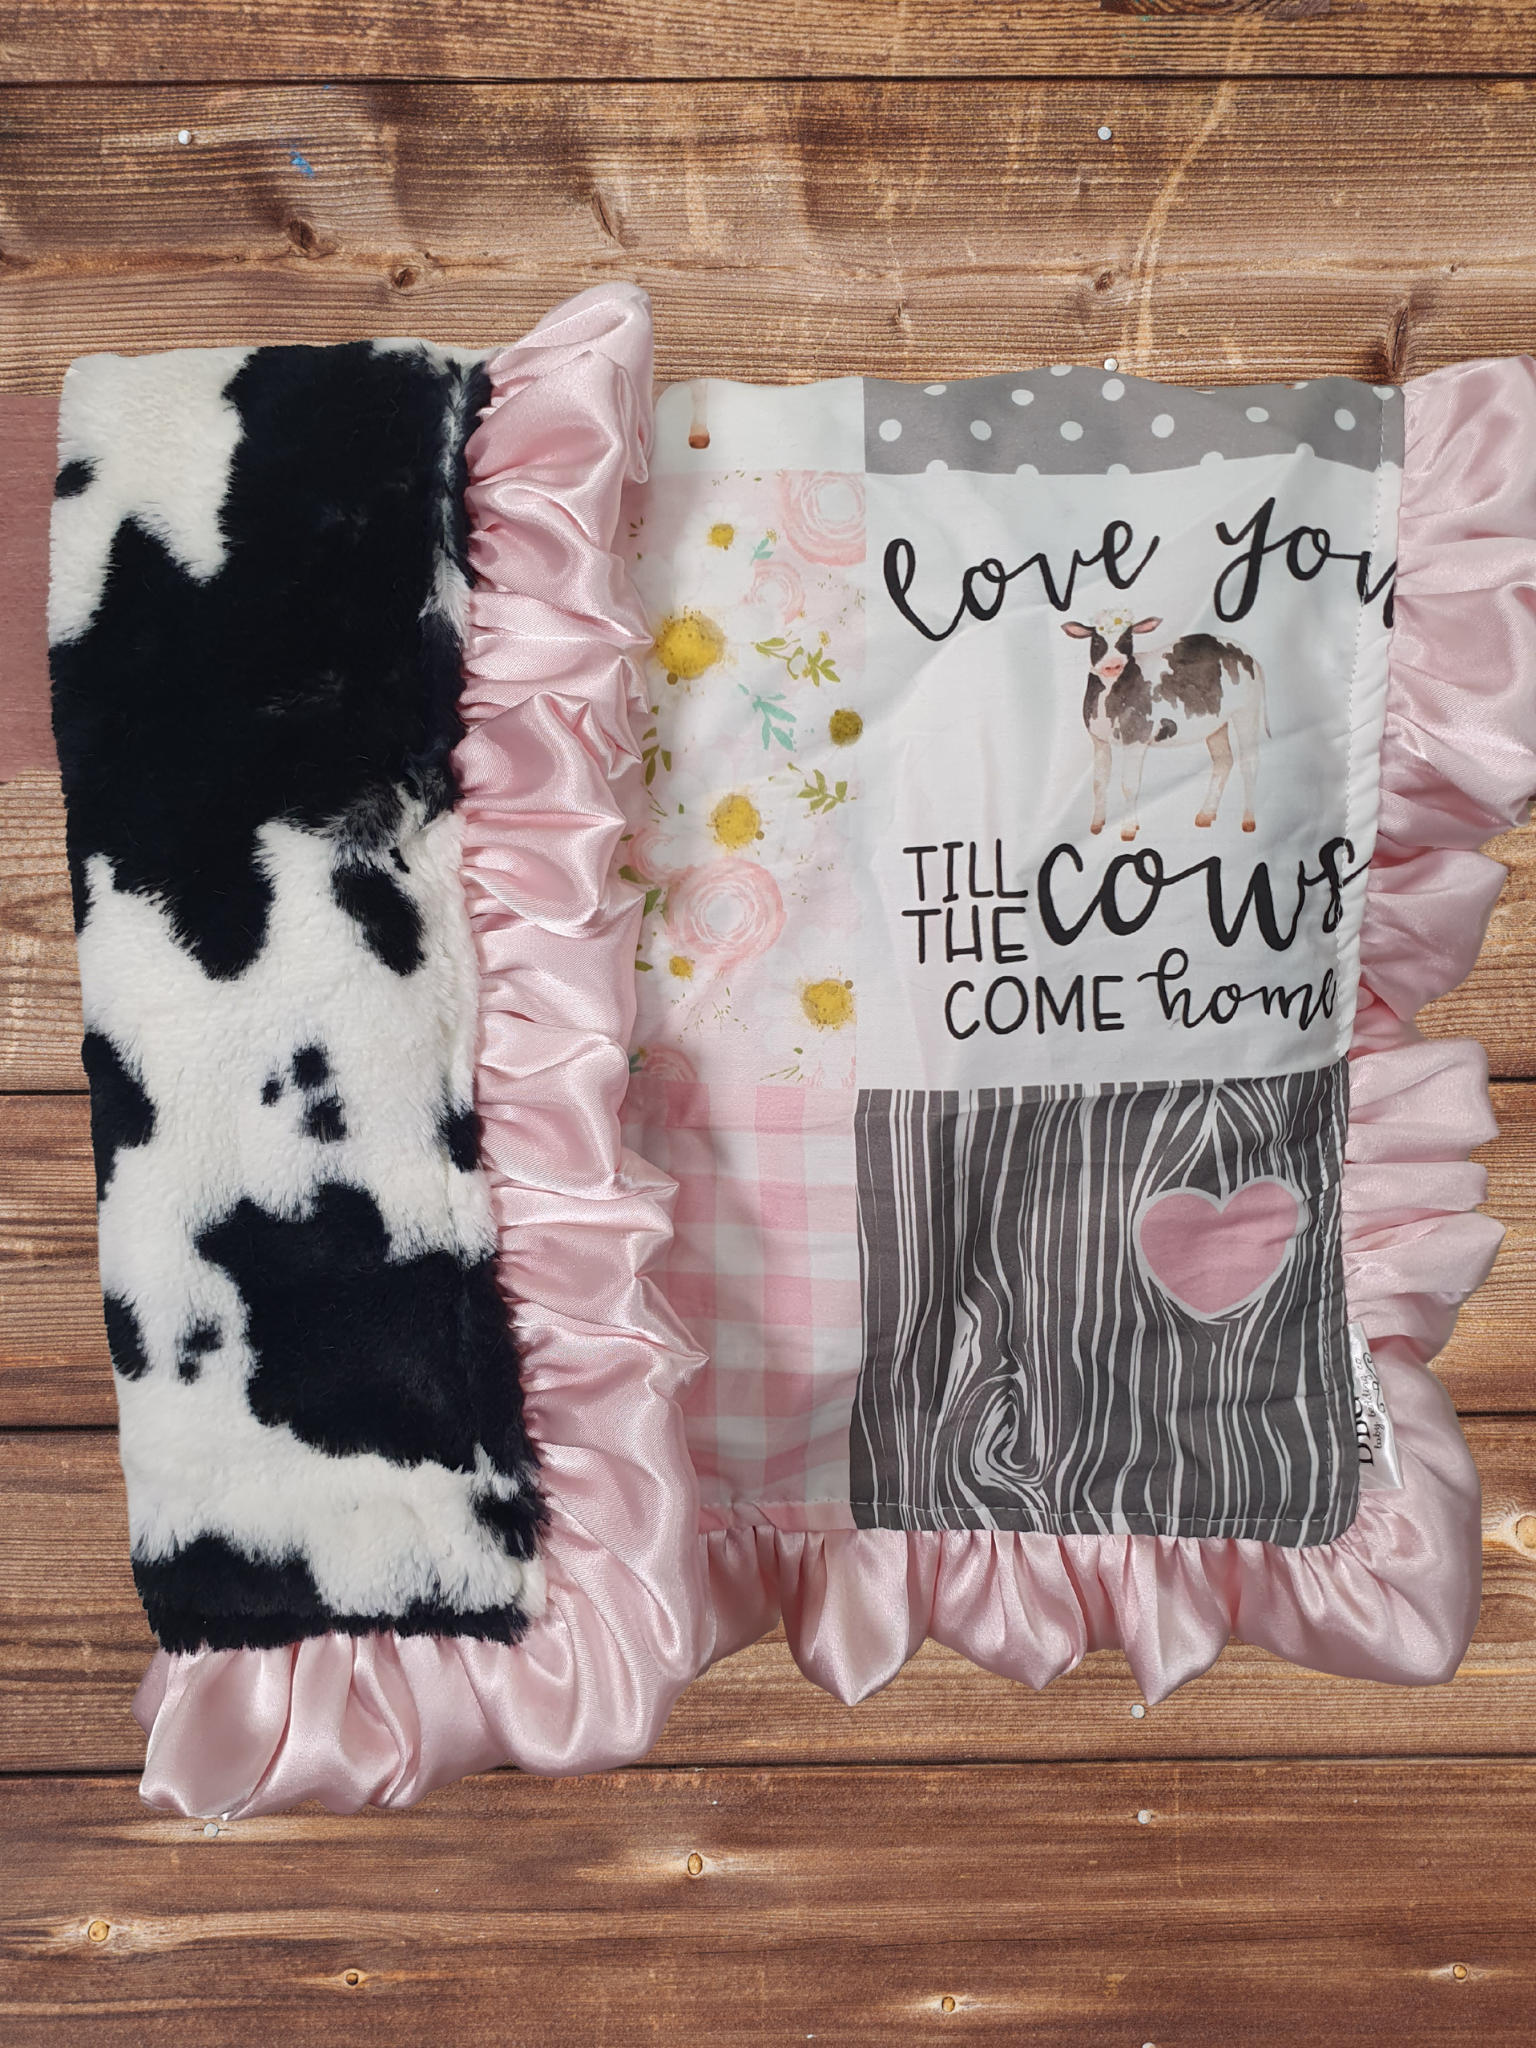 Ruffle Baby Lovey - Blush Cows Come Home and Black White Cow Minky Lovey - DBC Baby Bedding Co 